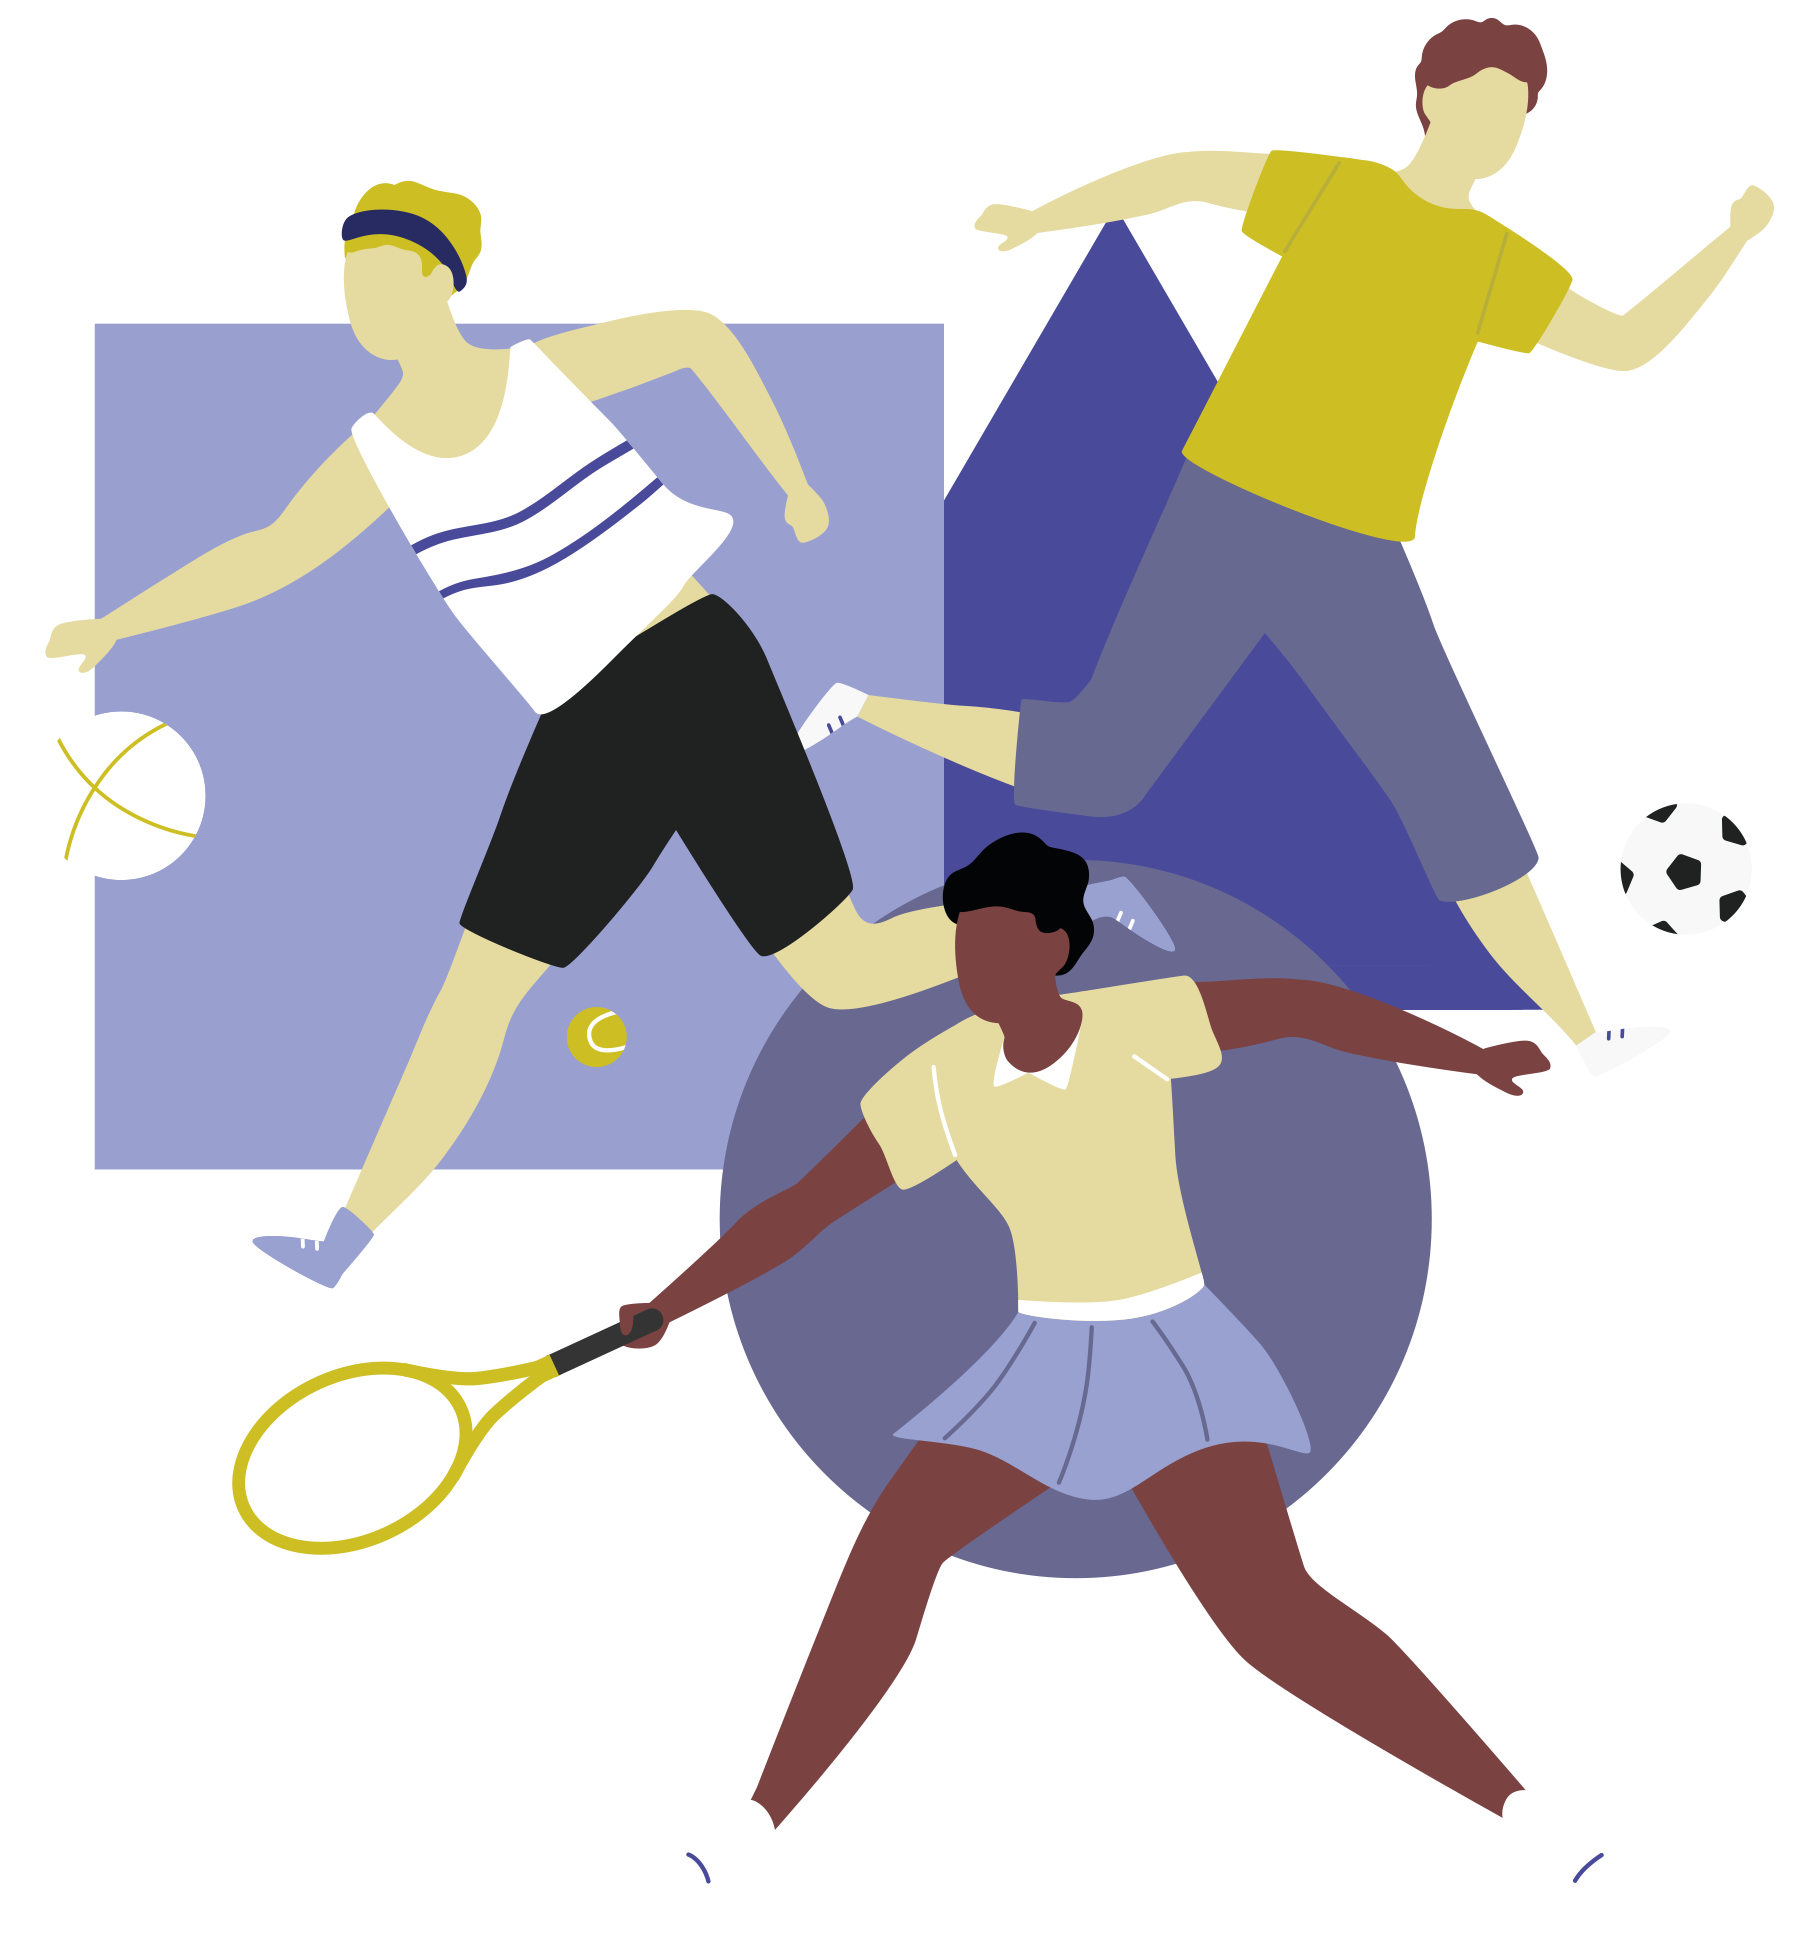 An illustration of three people playing sports; netball, football and tennis.